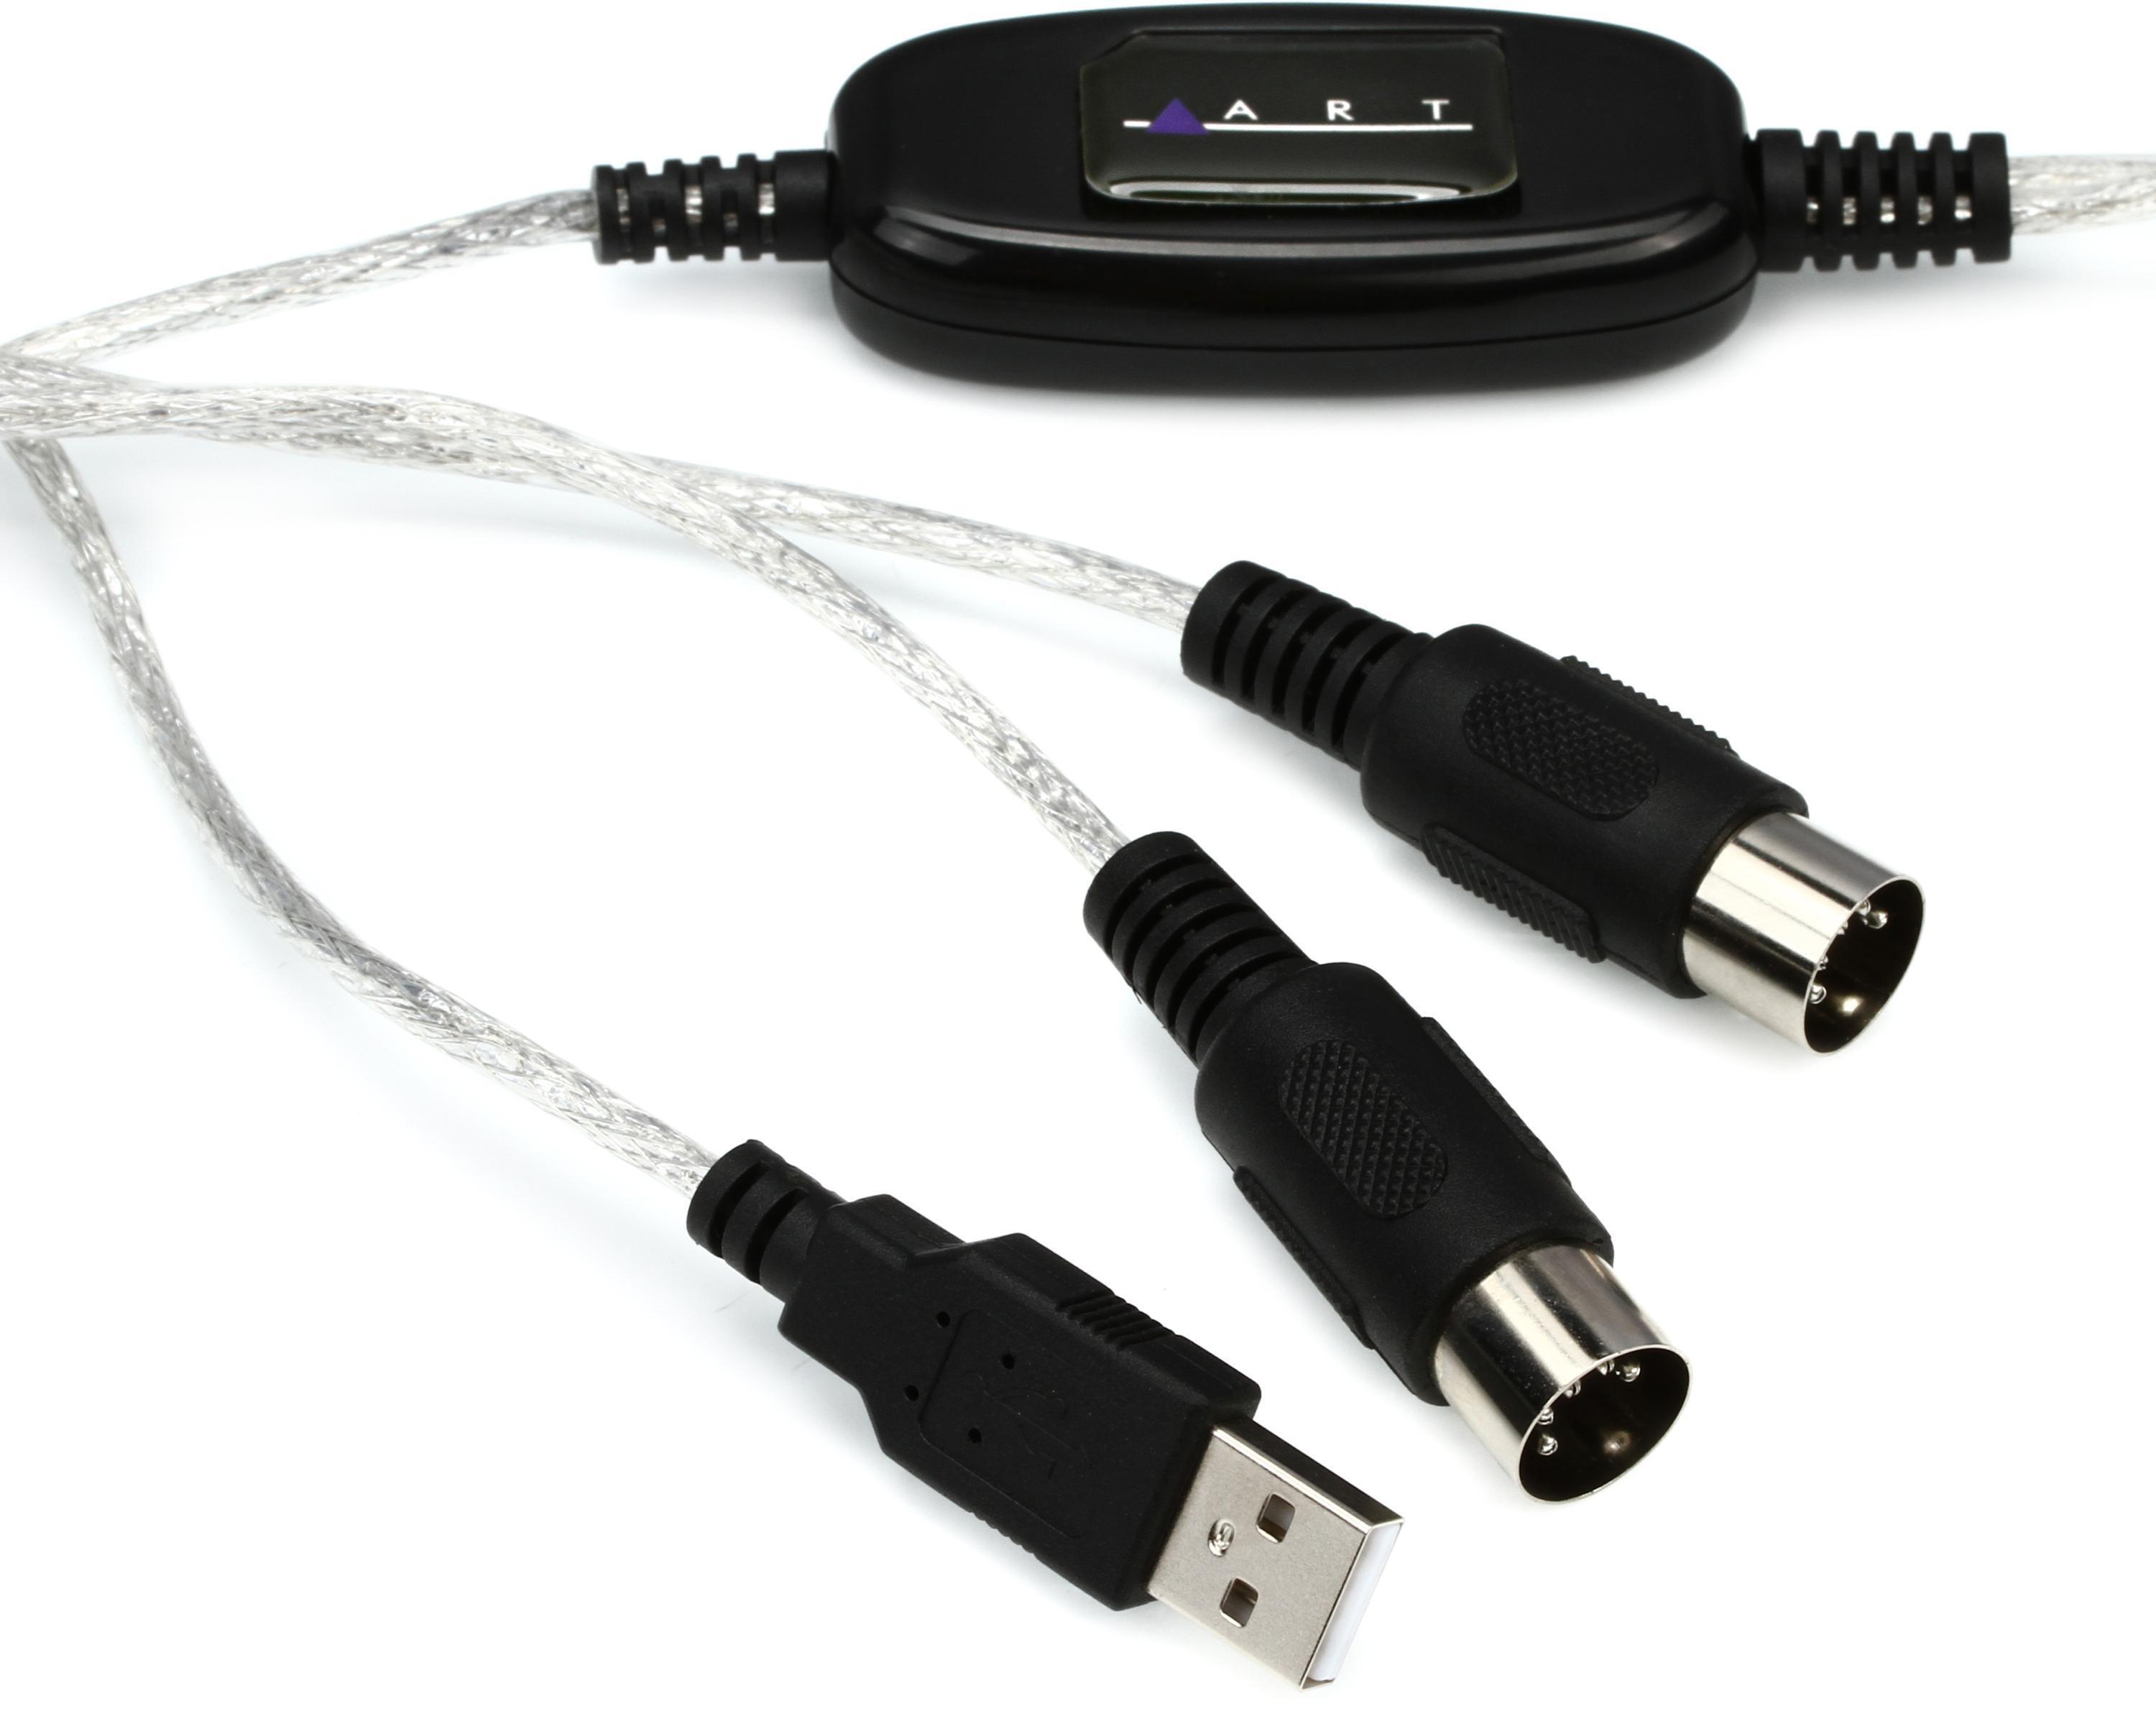 USB Type B Midi Cable To Type C Connector, Adapter Cable, Piano